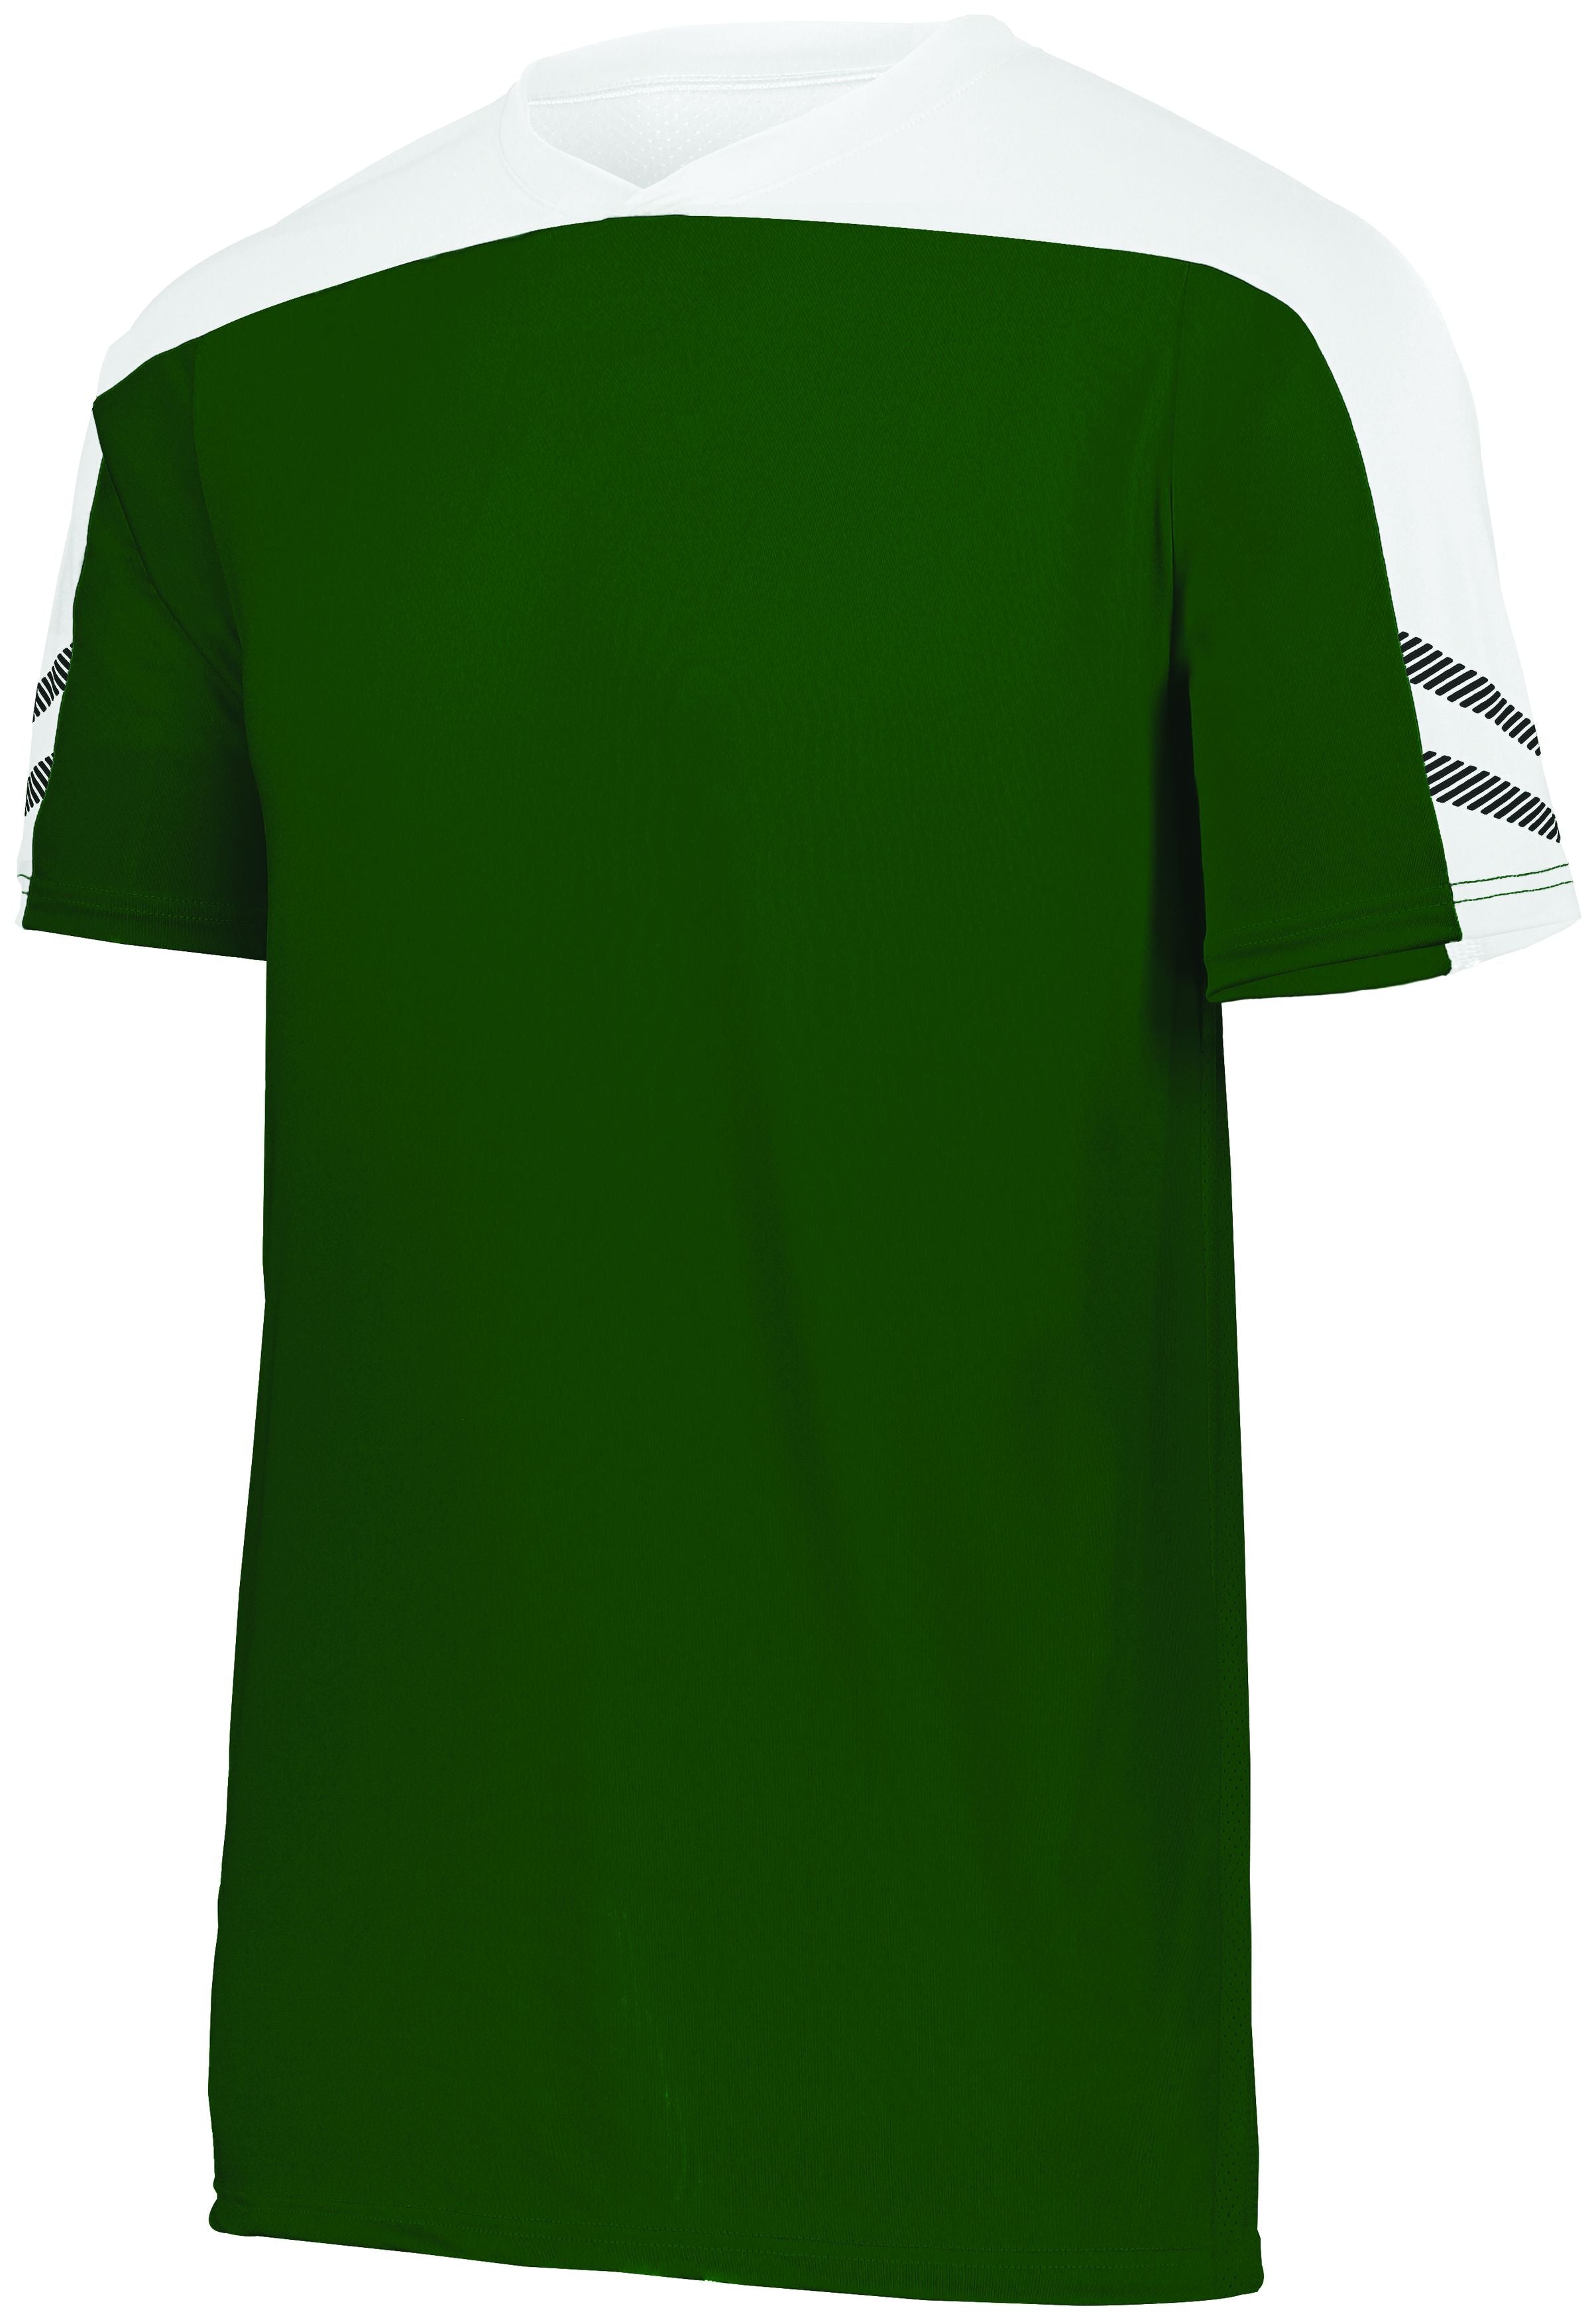 High 5 Anfield Soccer Jersey in Forest/White/Black  -Part of the Adult, Adult-Jersey, High5-Products, Soccer, Shirts, All-Sports-1 product lines at KanaleyCreations.com